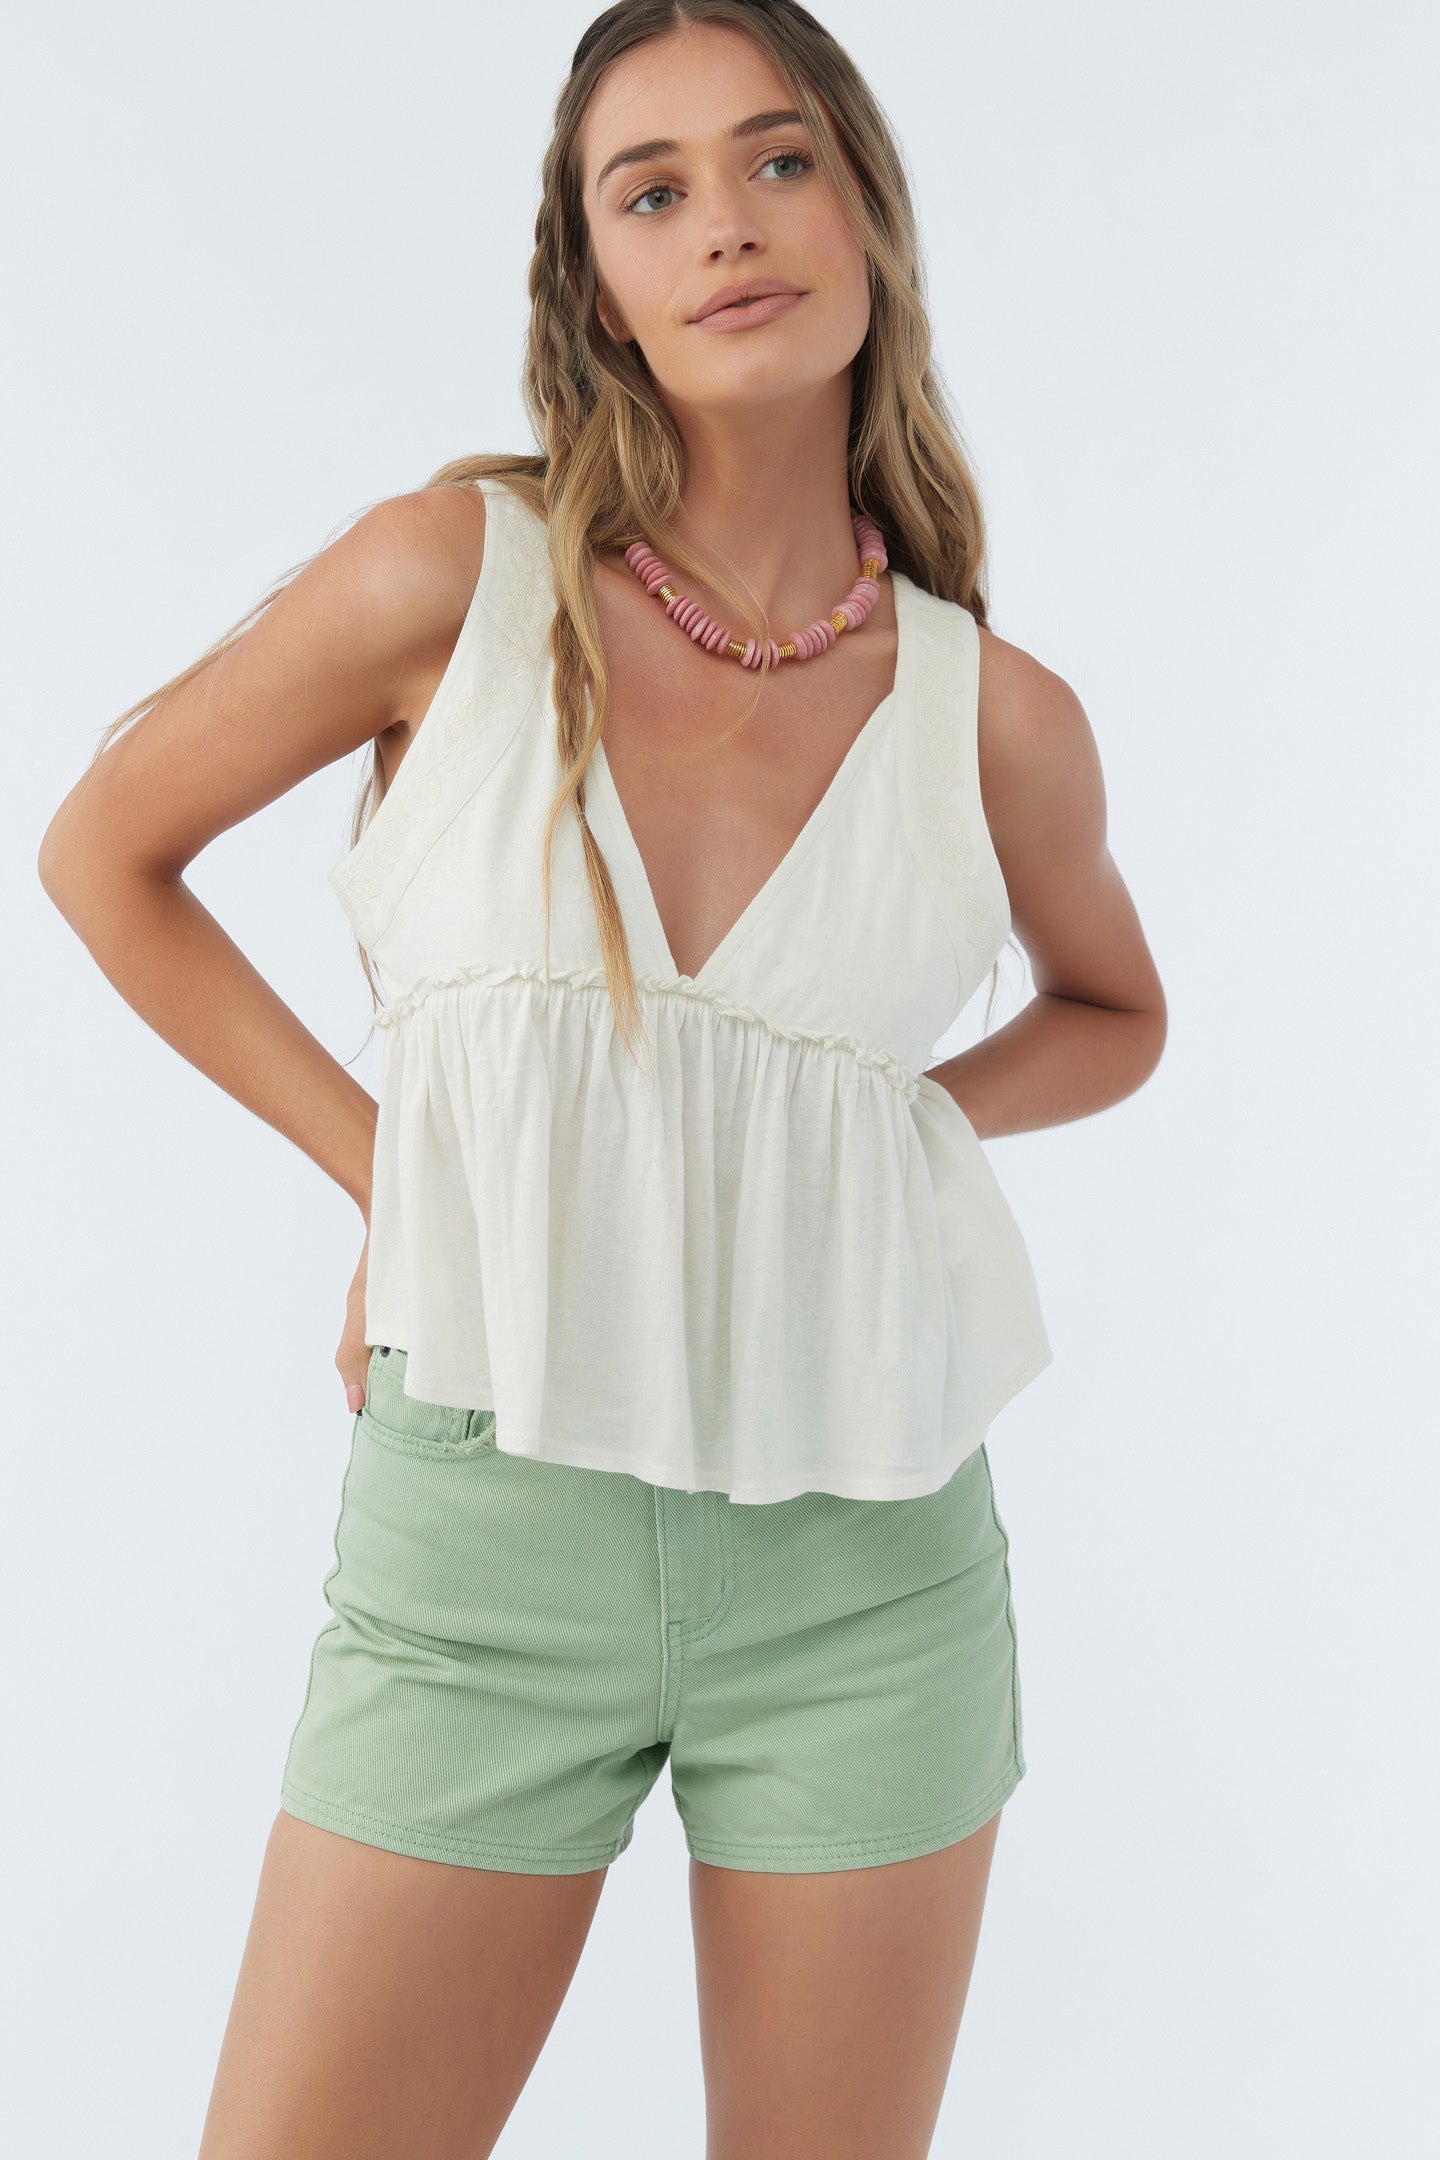 Topshop premium basic slouchy v neck tank top in oat heather